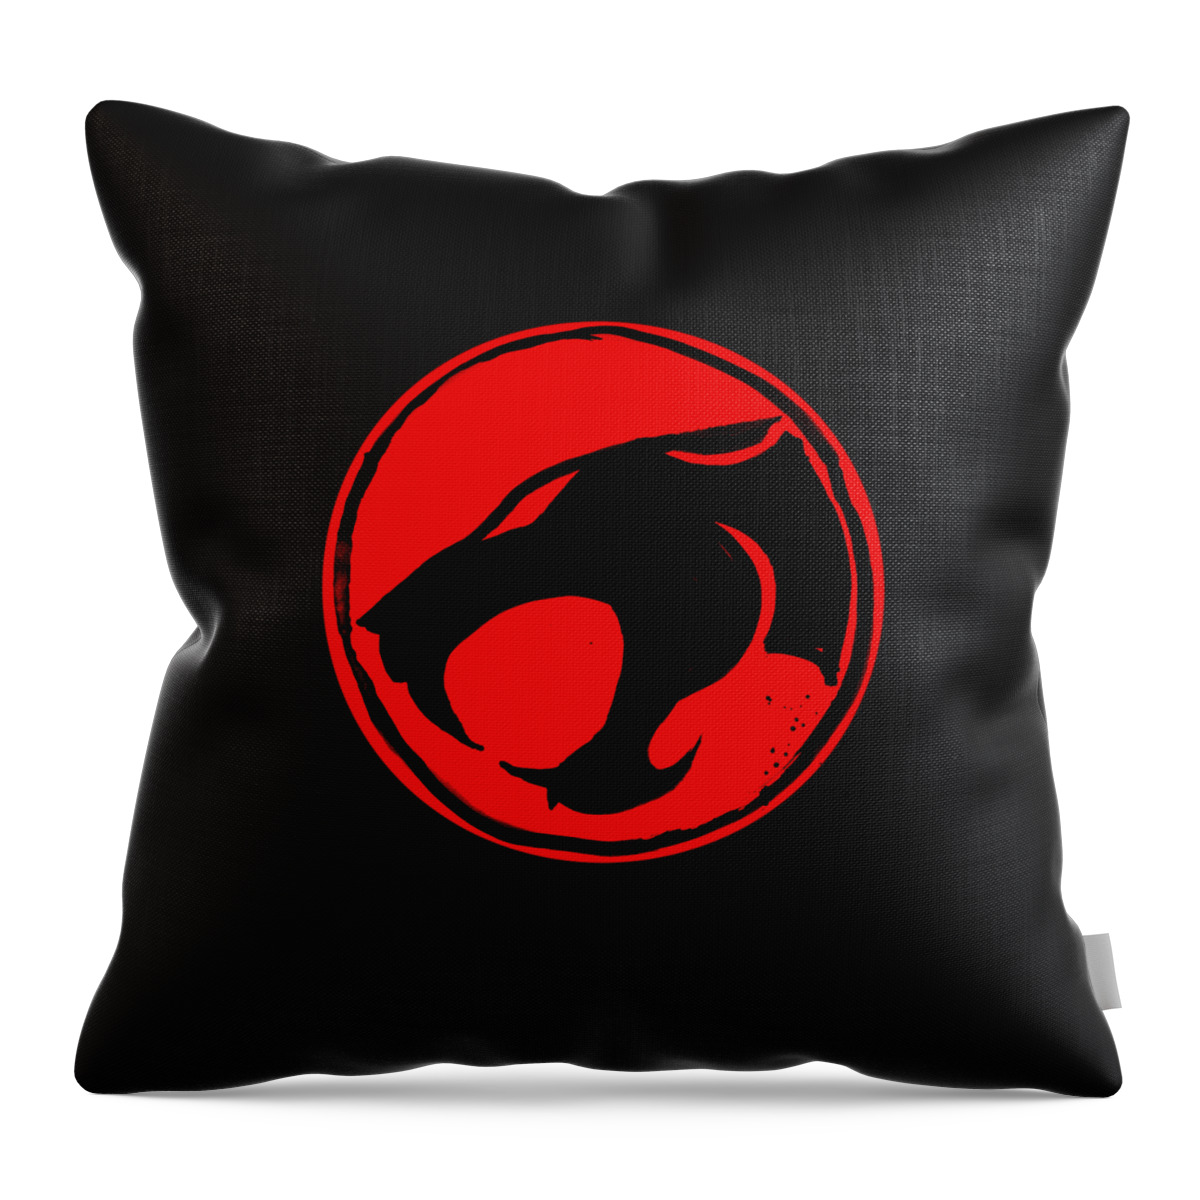 Thundercats Throw Pillow featuring the drawing Thundercats Logo by Pechane Sumie